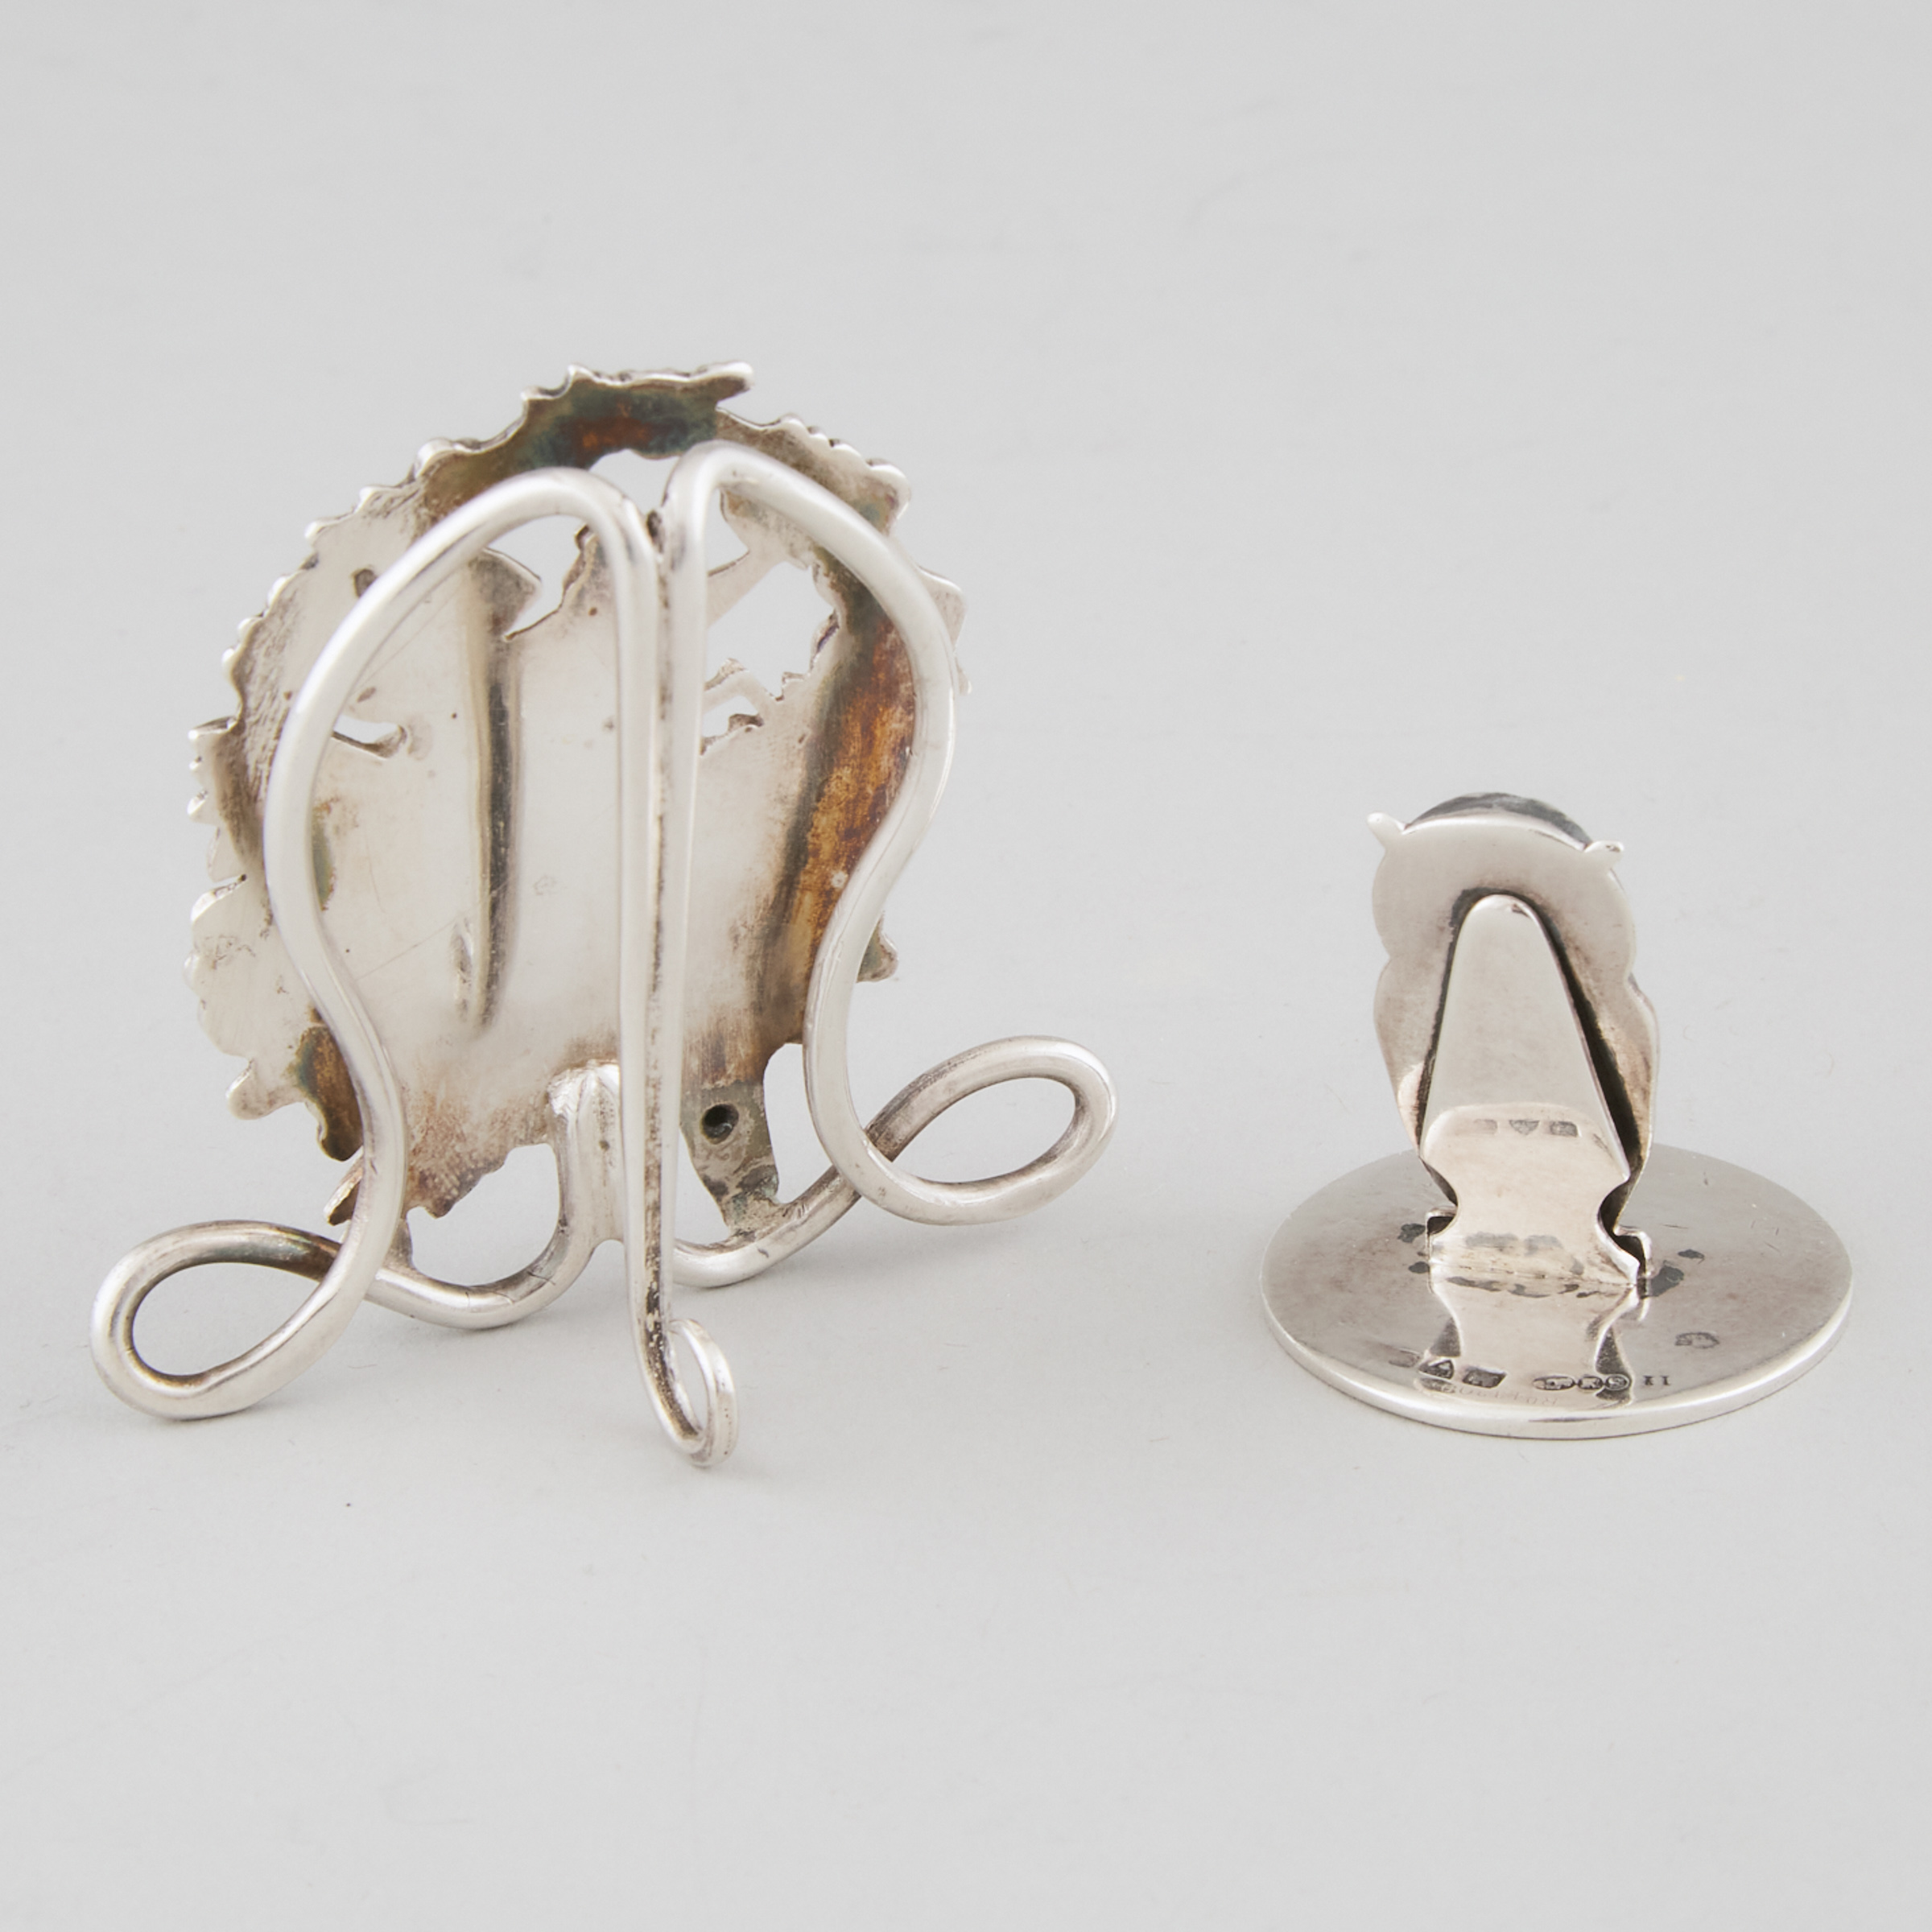 Two Edwardian Silver Place Card or Menu Holders, William Hutton & Sons, London, 1903, and Sampson Mordan & Co., Chester, c.1905-10